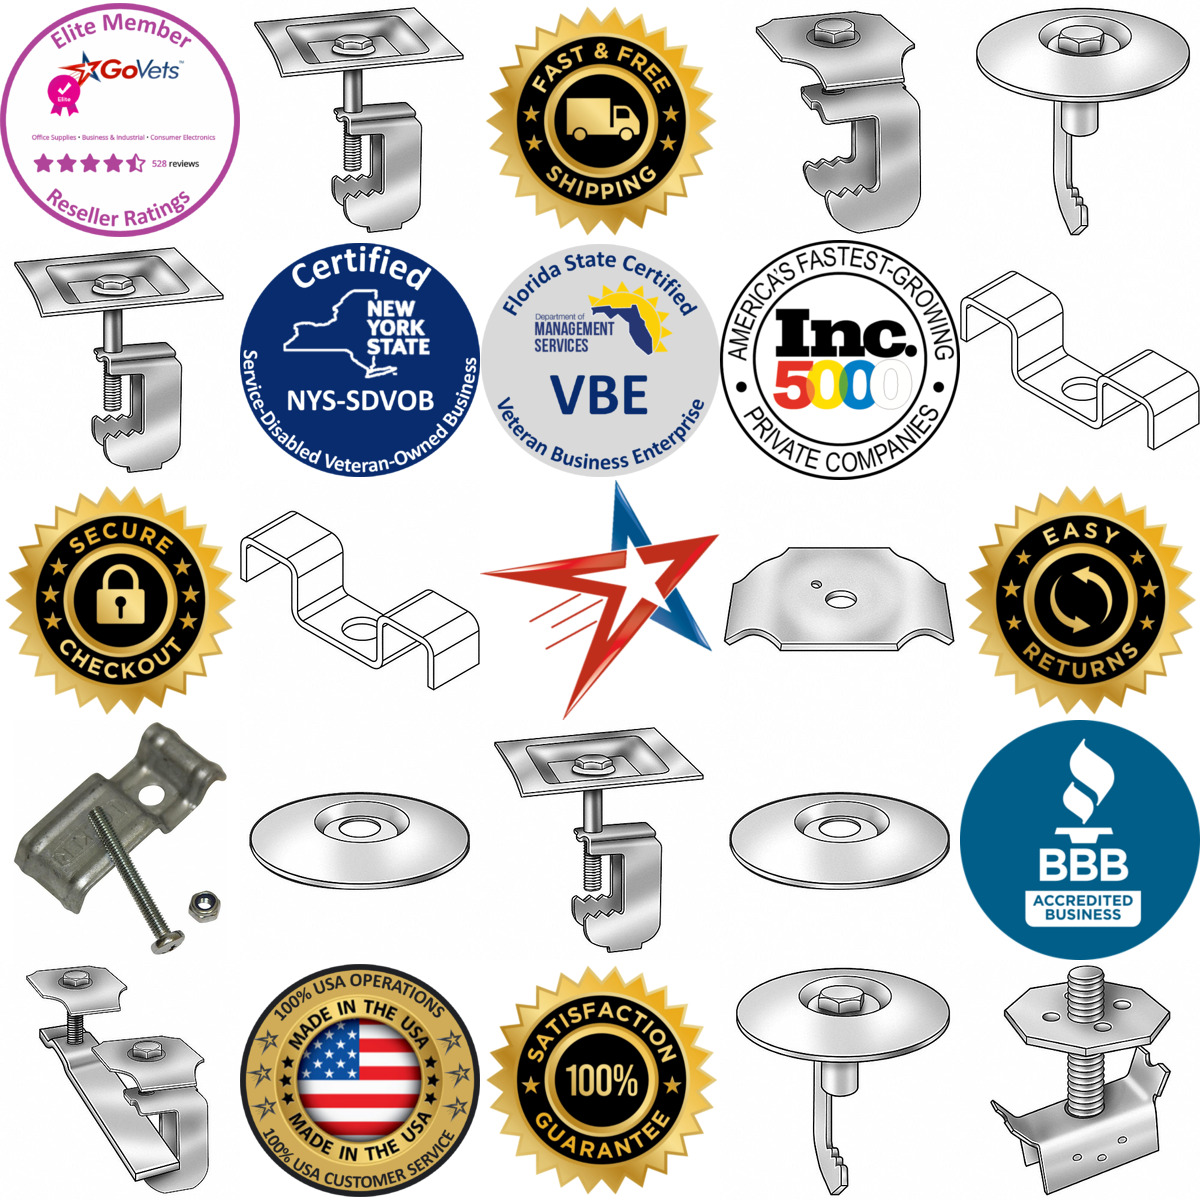 A selection of Grating Clips products on GoVets